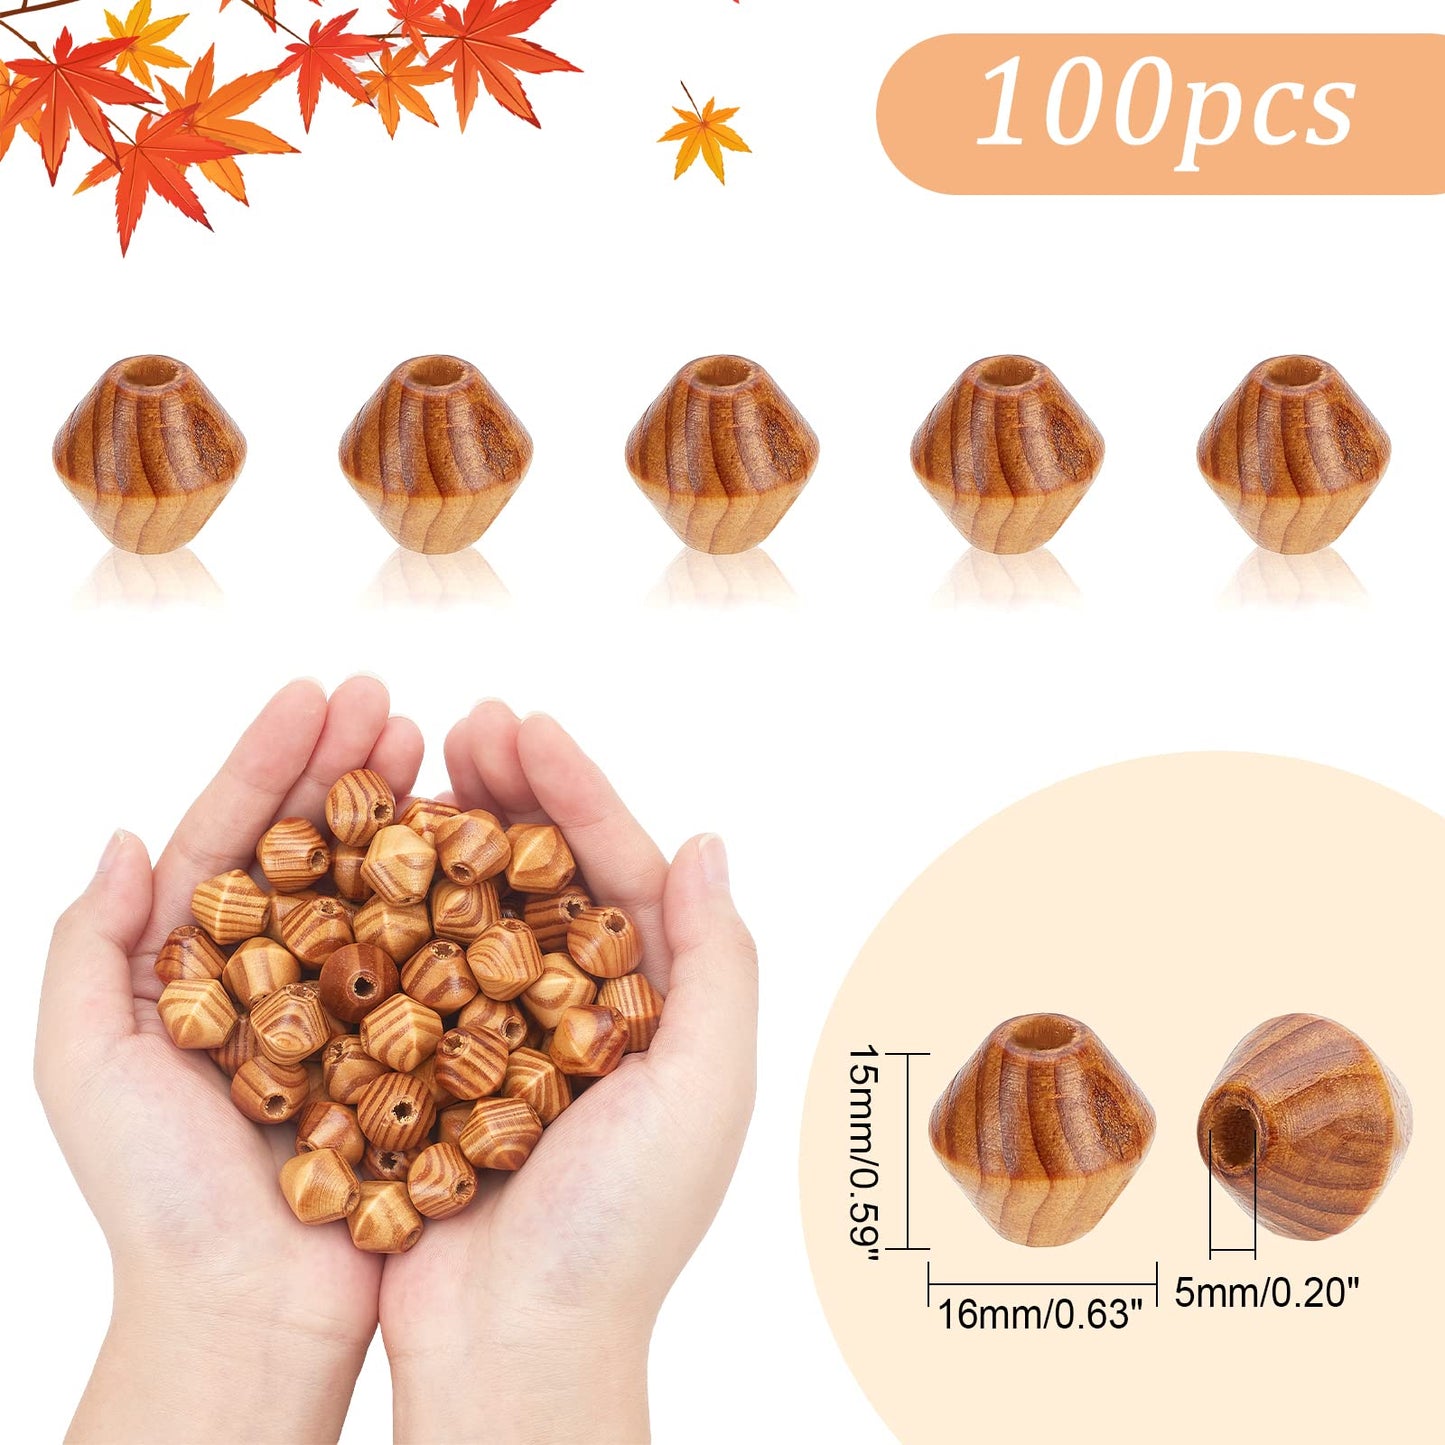 OLYCRAFT 100pcs Natural Wood Beads Faceted Geometric Wood Beads 16mm Wooden Spacer Beads Bicone Wooden Beads for Jewelry Making Bracelets Necklace Earring DIY Crafts - Hole 5mm